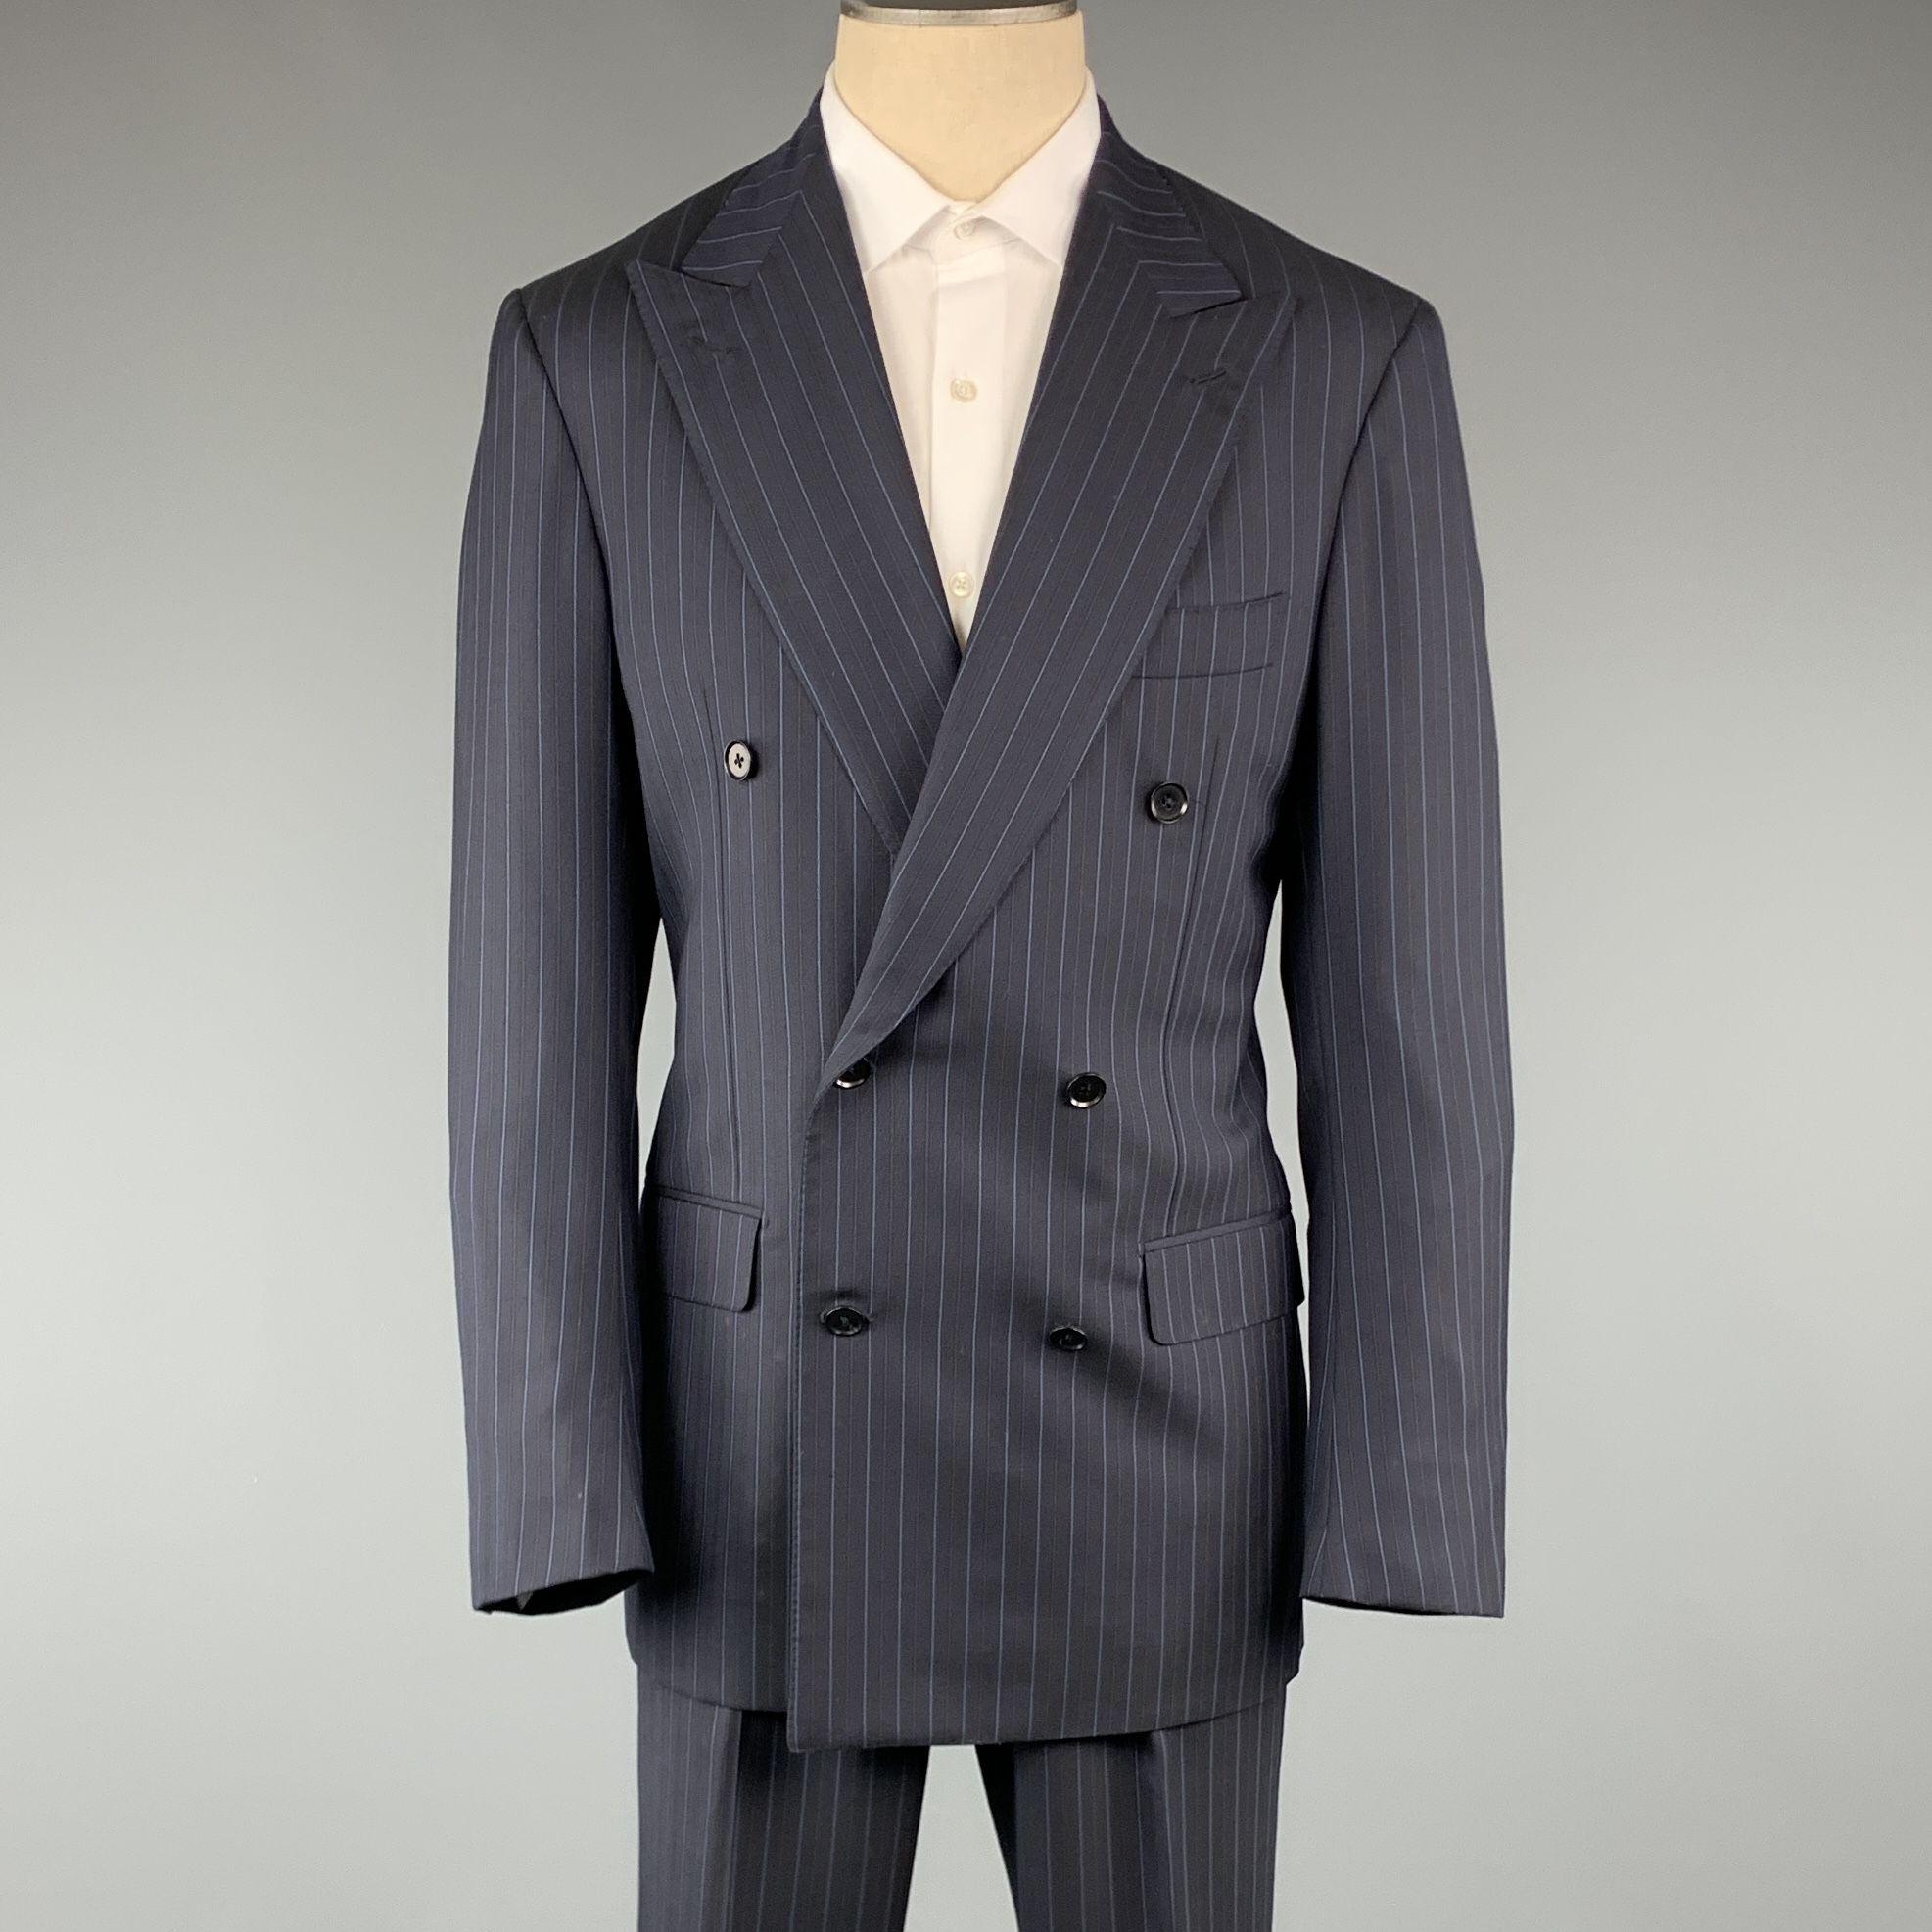 ISAIA suit comes in a navy stripe wool and includes a double breasted, sport coat with peak lapel and matching front trousers.

Excellent Pre-Owned Condition.
Marked: 50

Measurements:

Jacket

Shoulder: 19.5 in.
Chest: 40 in.
Sleeve: 27 in.
Length: